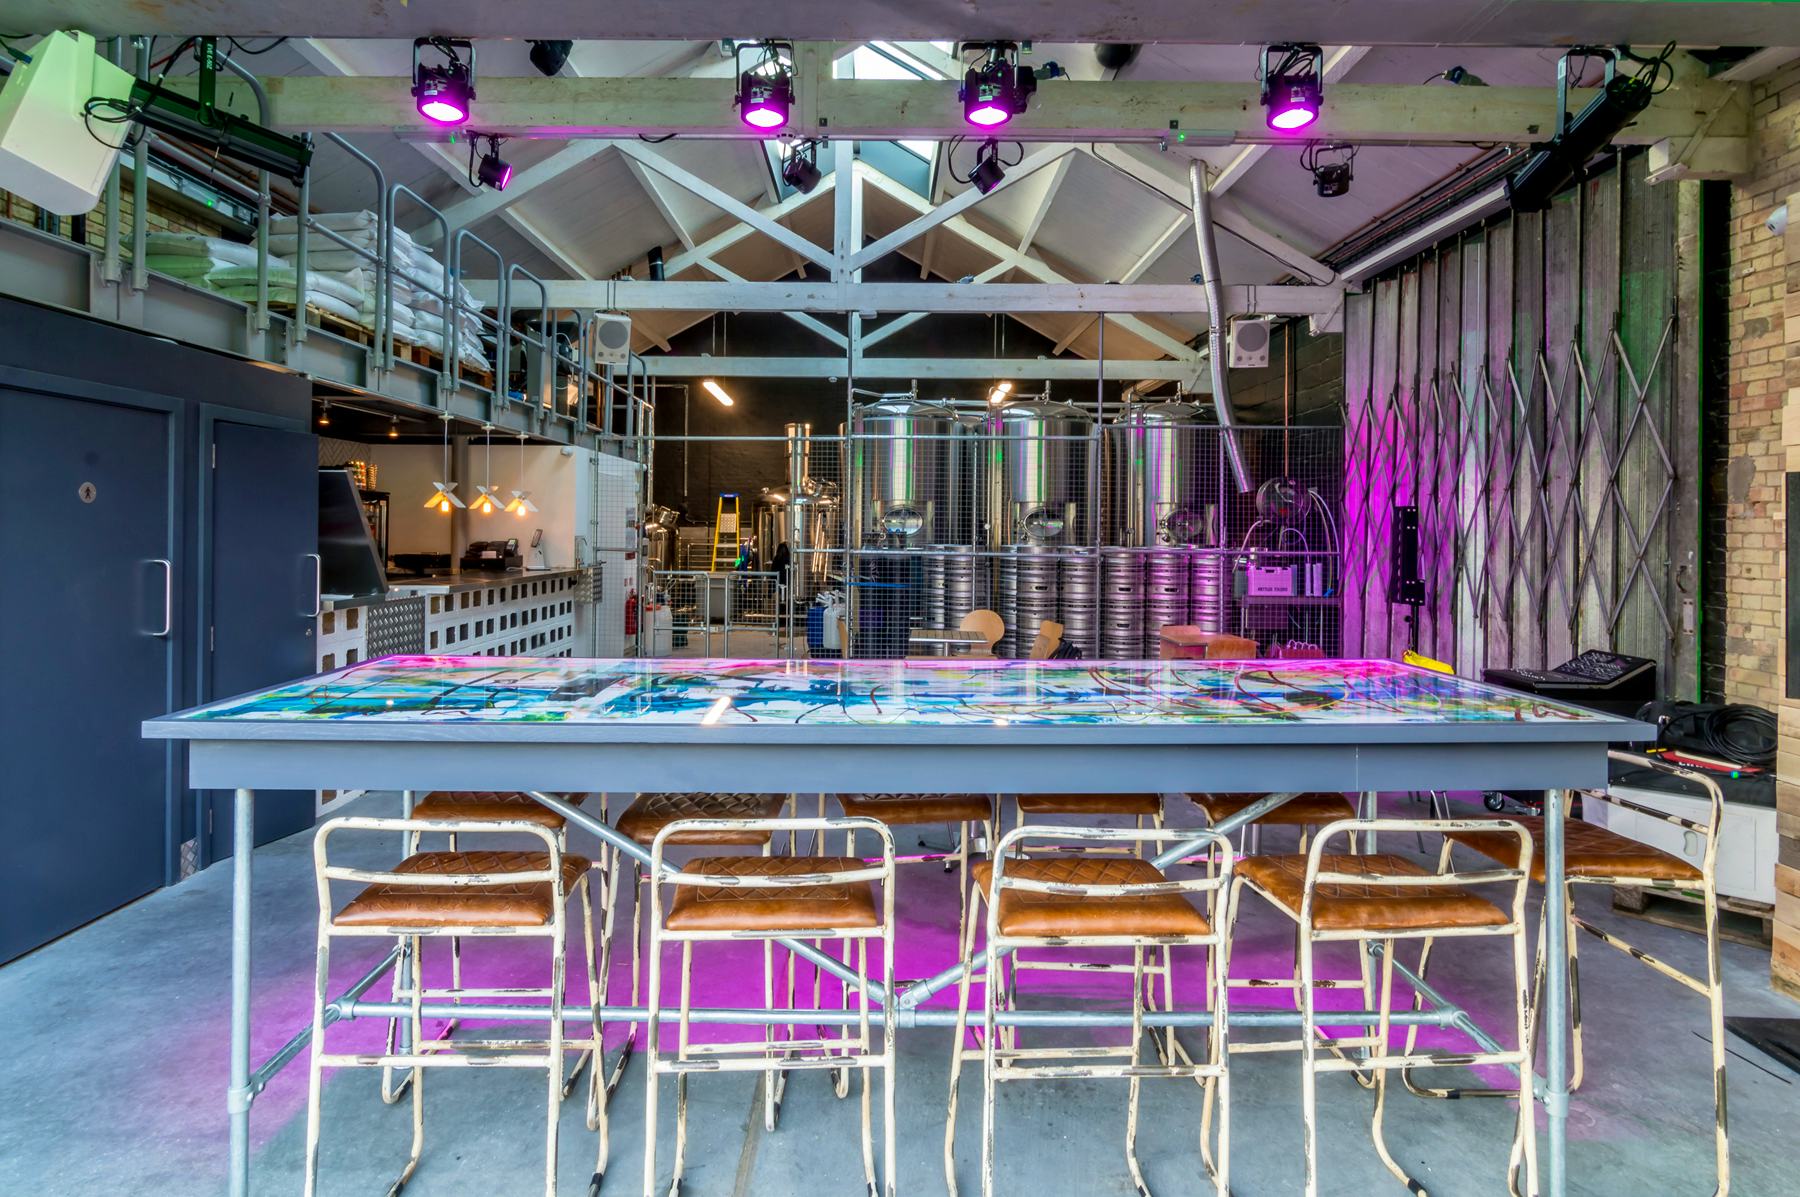 Two Tribes brewhouse taproom events space london kings cross venue hire beer tastings